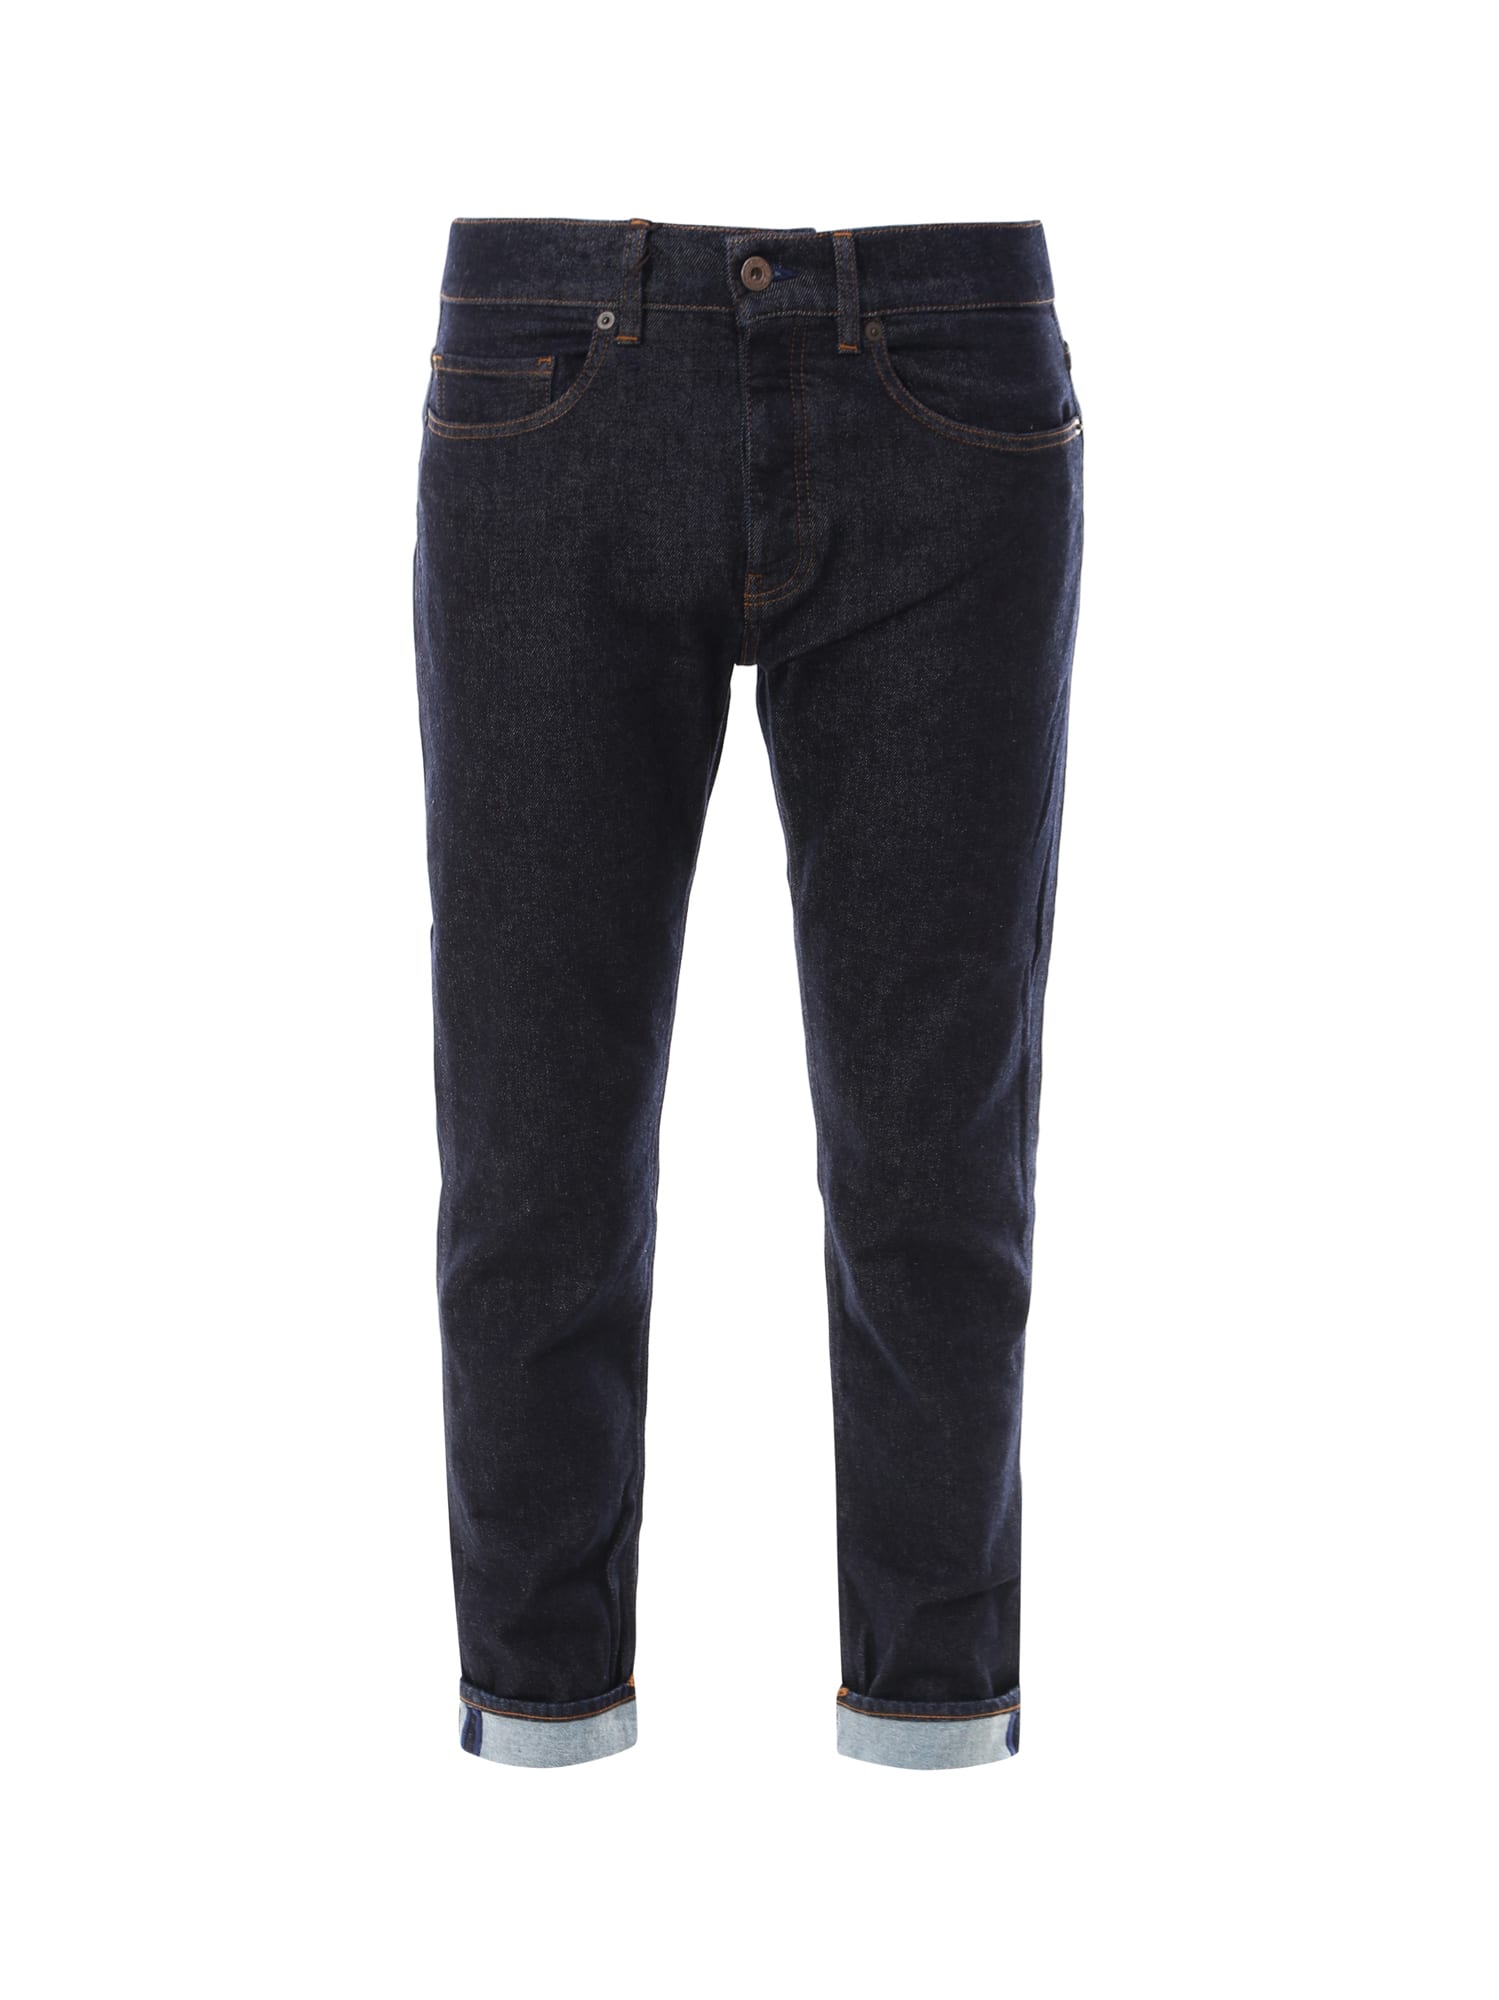 PENCE JEANS,11568166